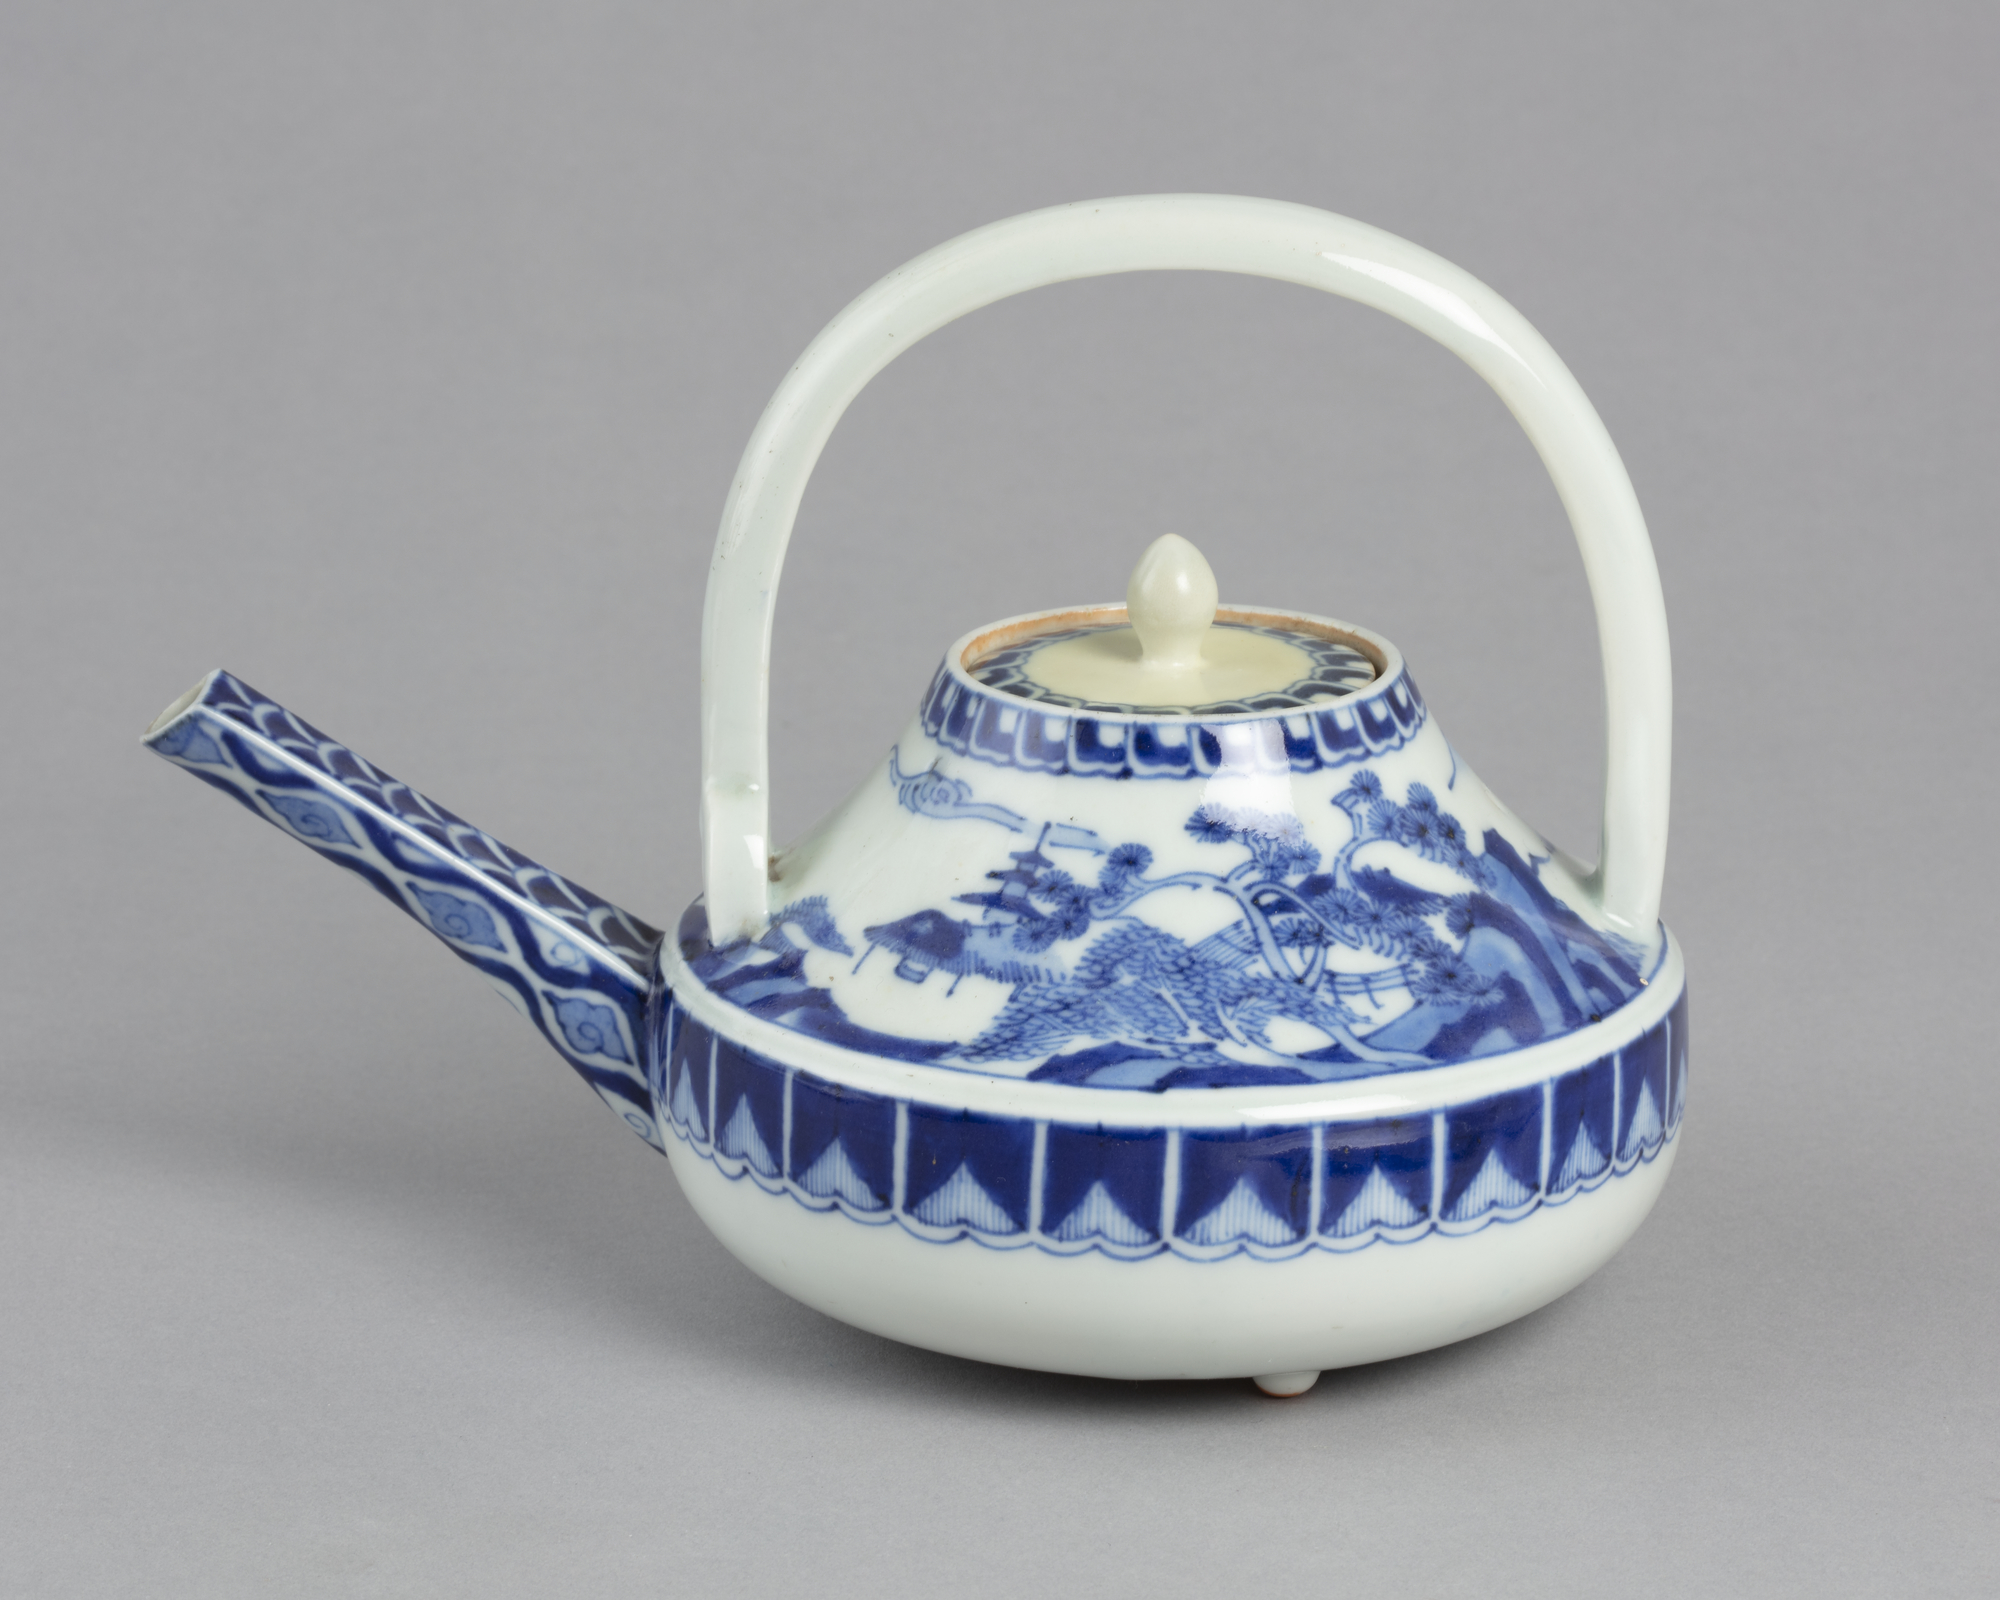 Sake ewer which looks like a teapot with a blue on white design